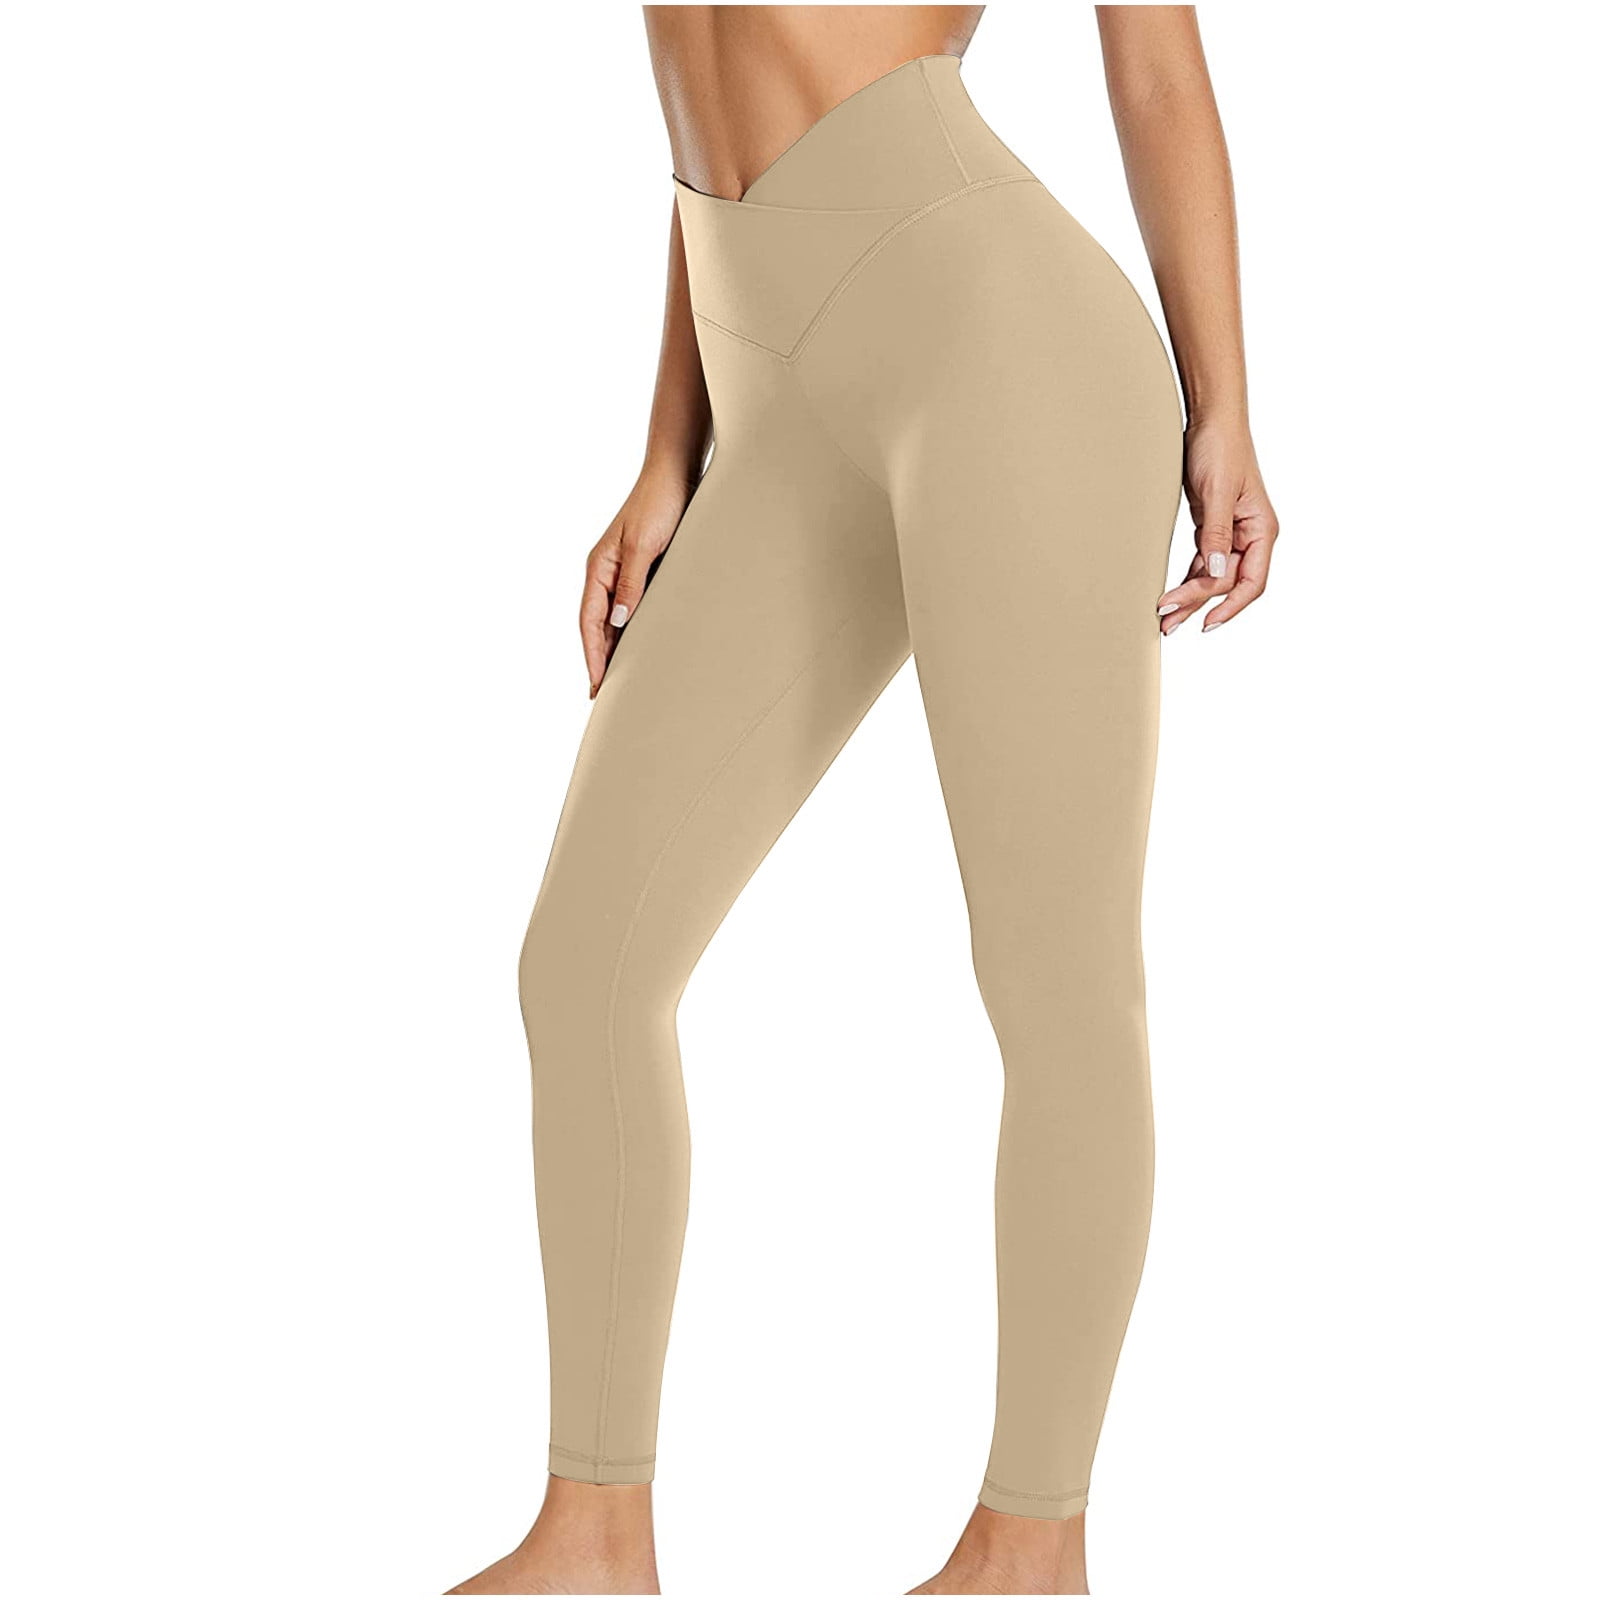 V Crossover Leggings for Women Solid Butt Lifting High Waist Seamless  Workout Yoga Pants Buttery Soft Athletic Pants(L，Khaki） 